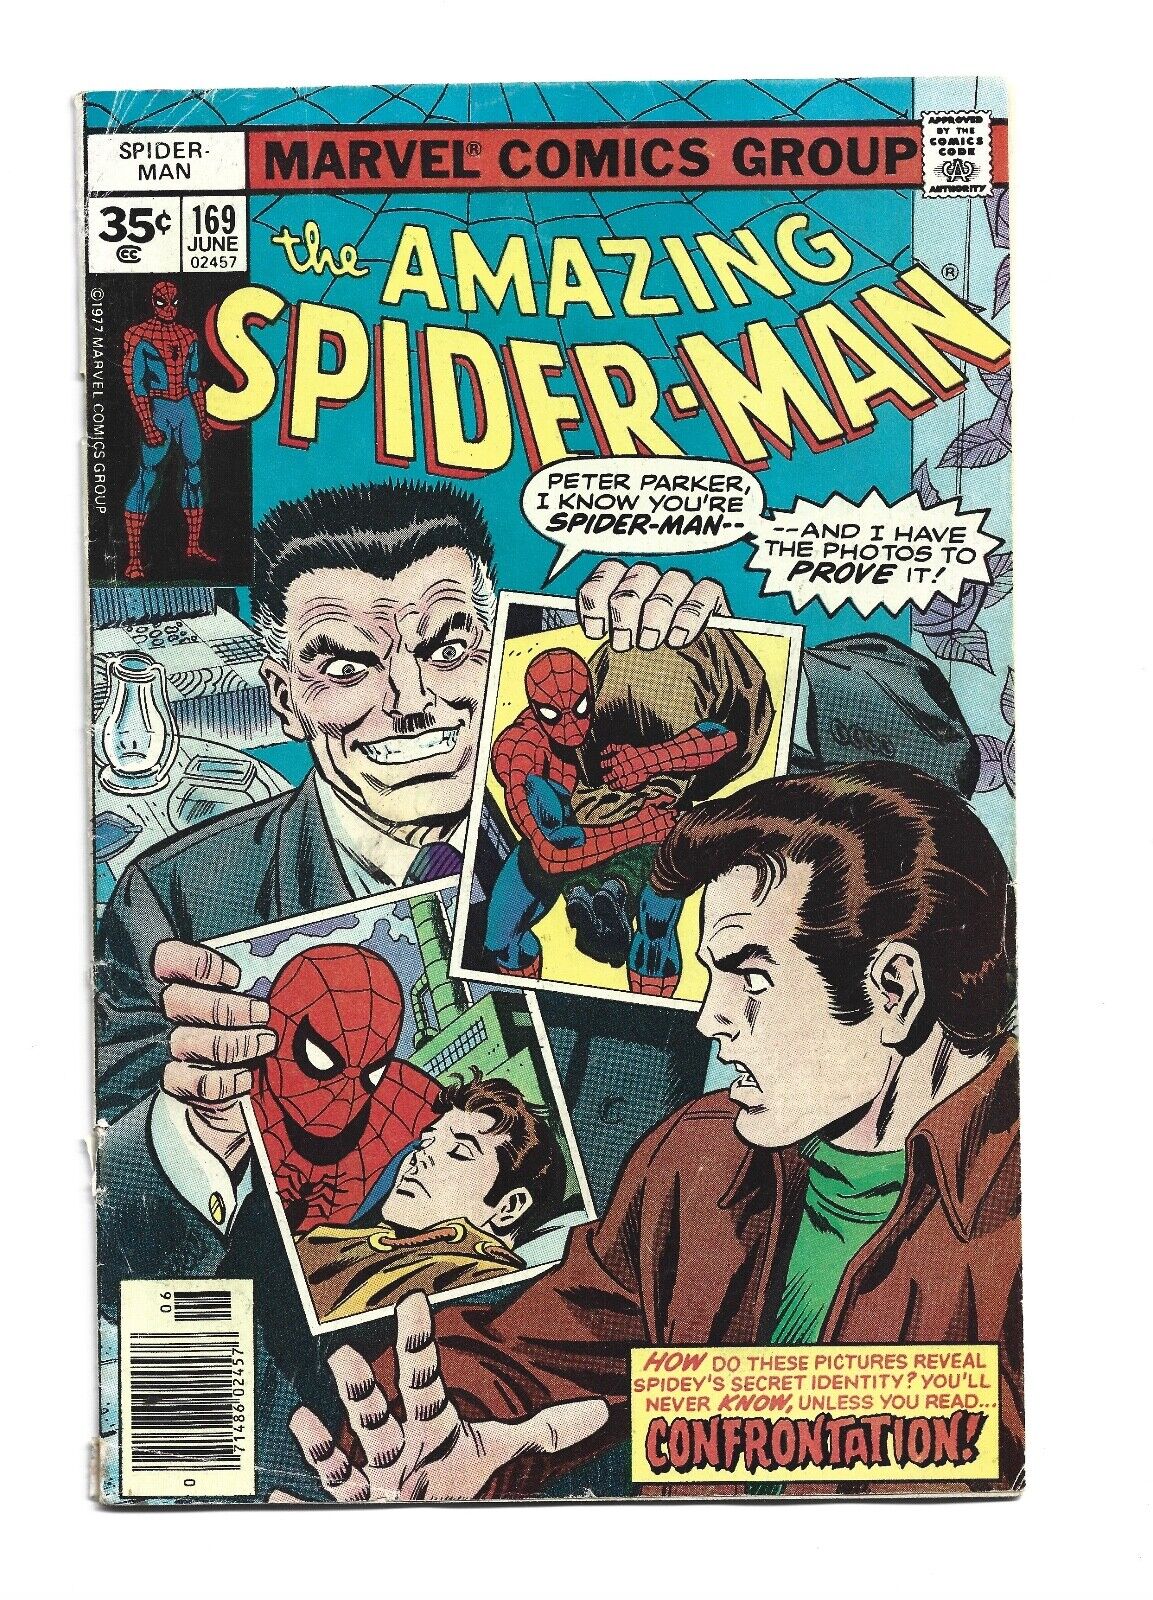 Amazing Spider-man #169, GD/VG 3.0, 35 Cent Price Variant, Doctor Faustus